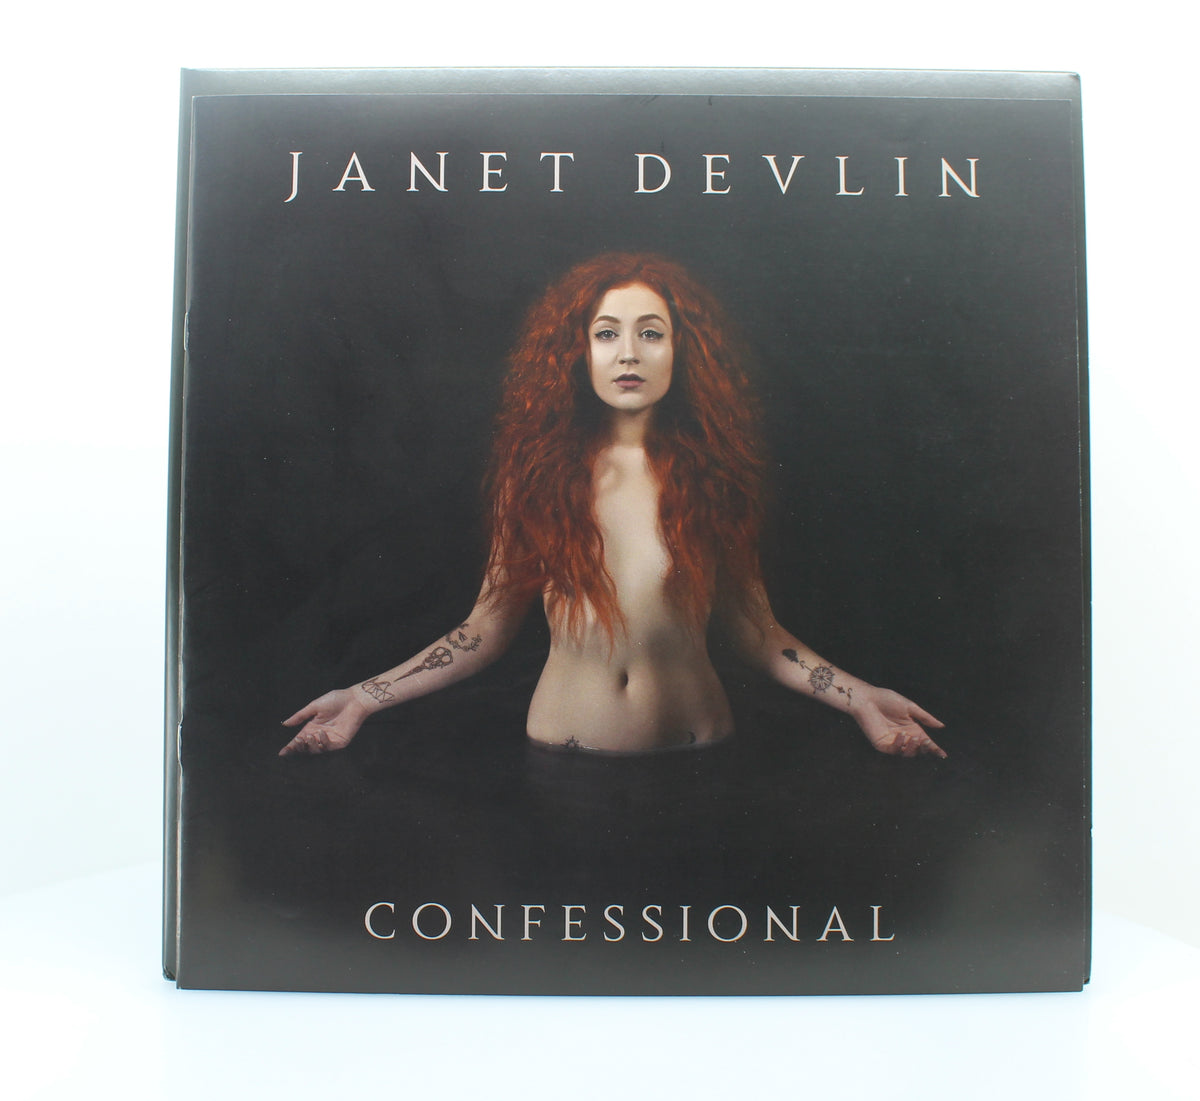 Janet Devlin - Confessional, Vinyl, LP, Special Edition, Marbled, Signed, UK 2020 (Various diff)